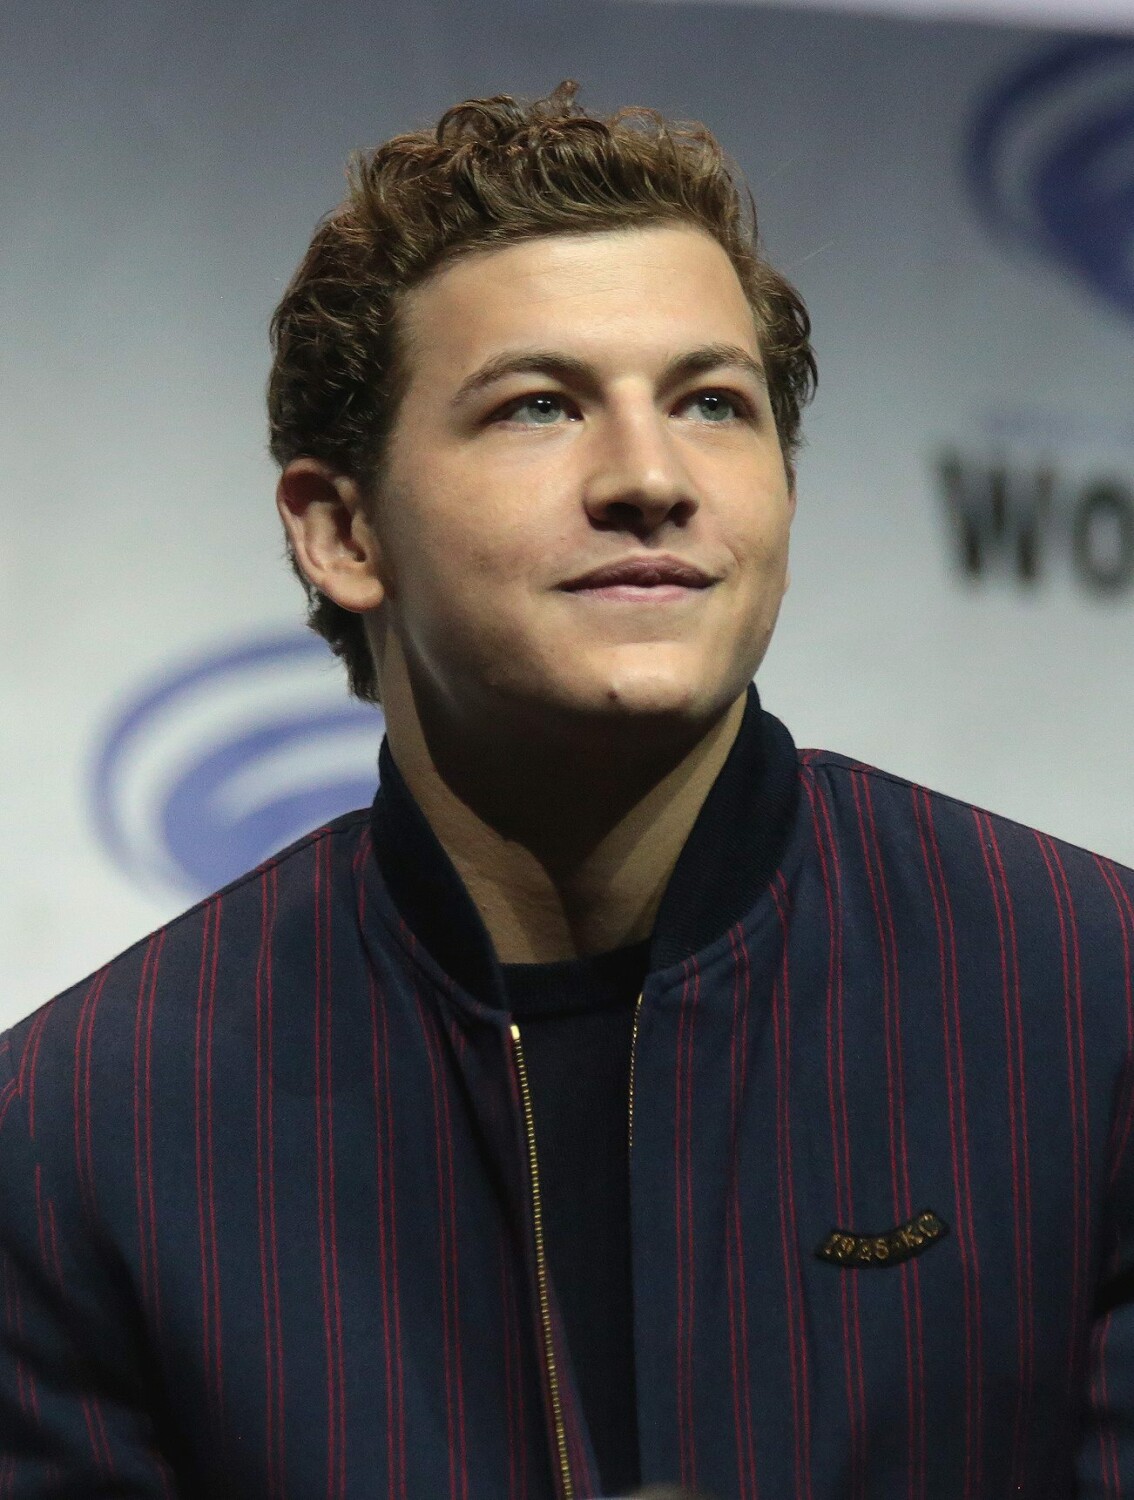 Tye Sheridan. By Gage Skidmore, CC BY-SA 3.0, https://commons.wikimedia.org/w/index.php?curid=67960195